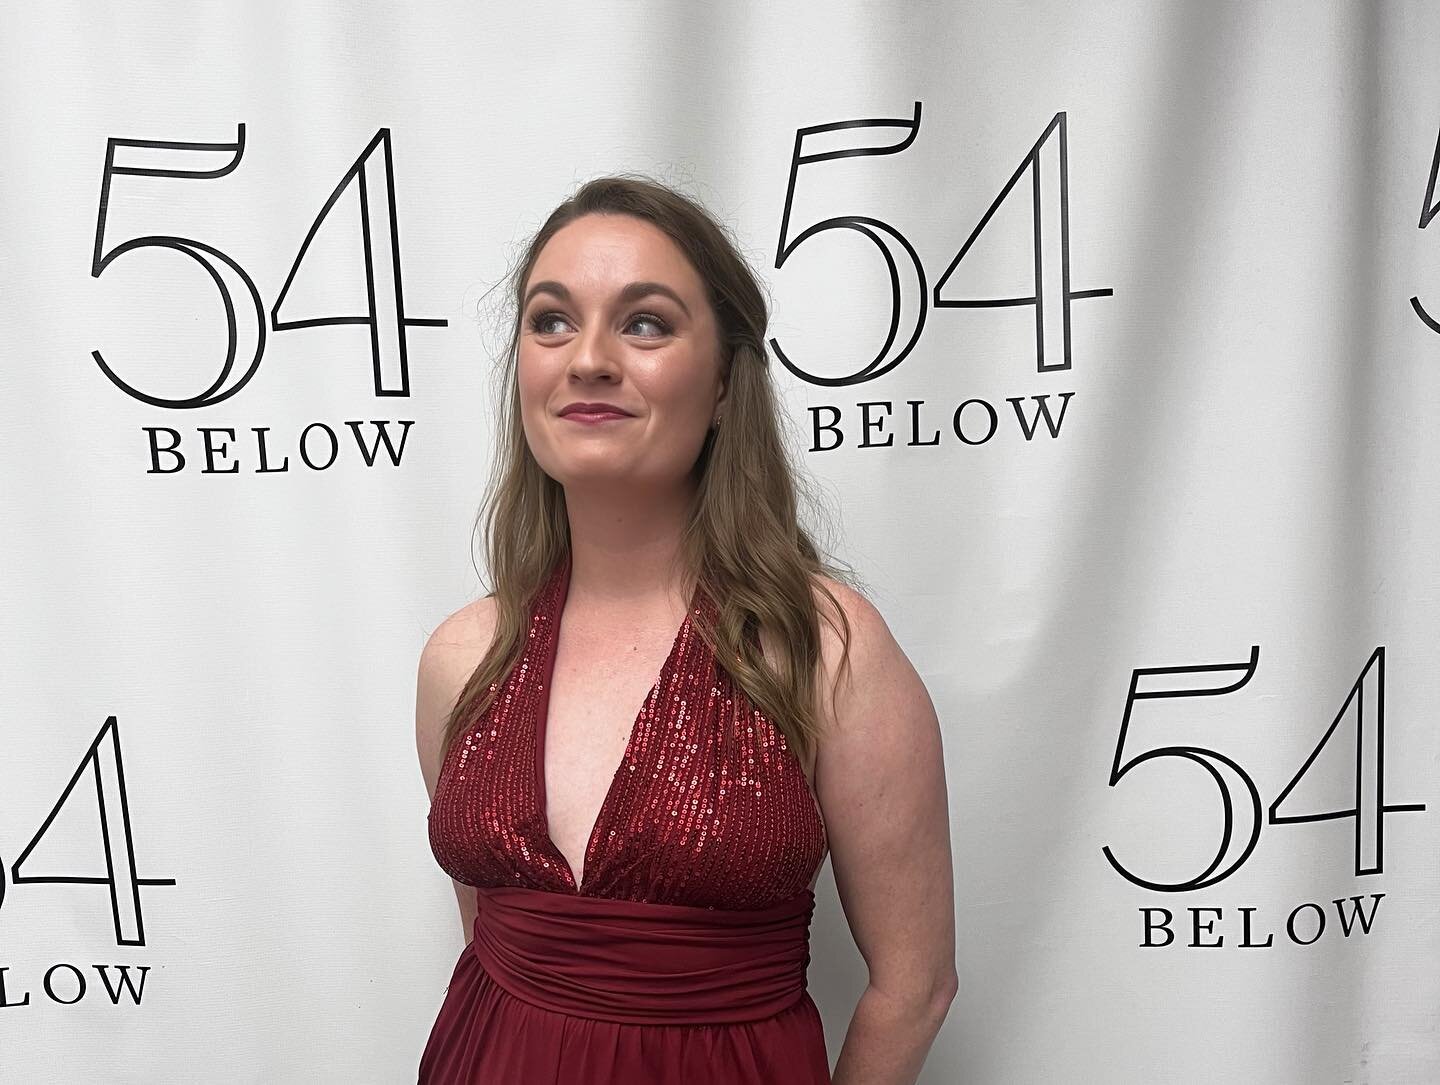 Guess I finally did the thing: Sang a song that wasn&rsquo;t Disney in public for the first time in 4 years. Oh and made my NYC and 54 Below debut. Footage to come, in the meanwhile&hellip; I&rsquo;m so grateful for the people who inhabit my life and